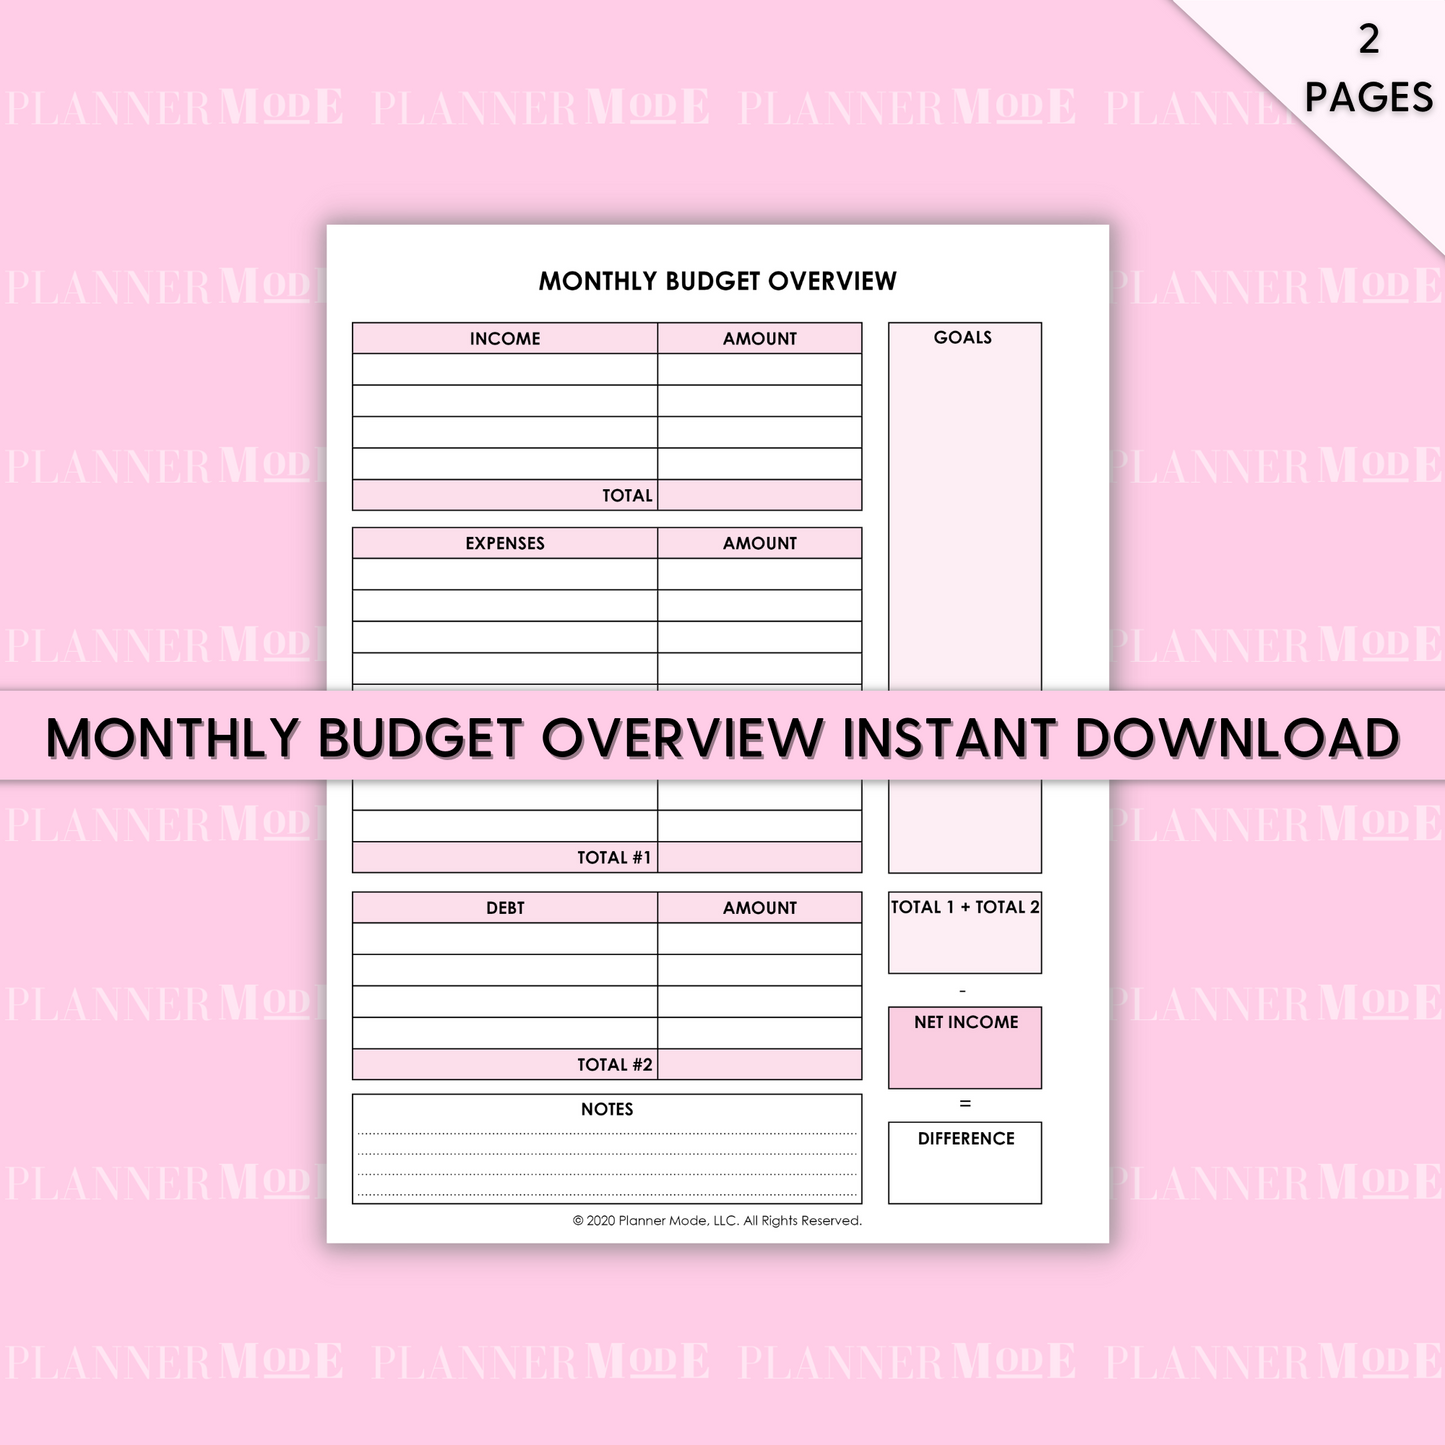 Monthly Budget Overview